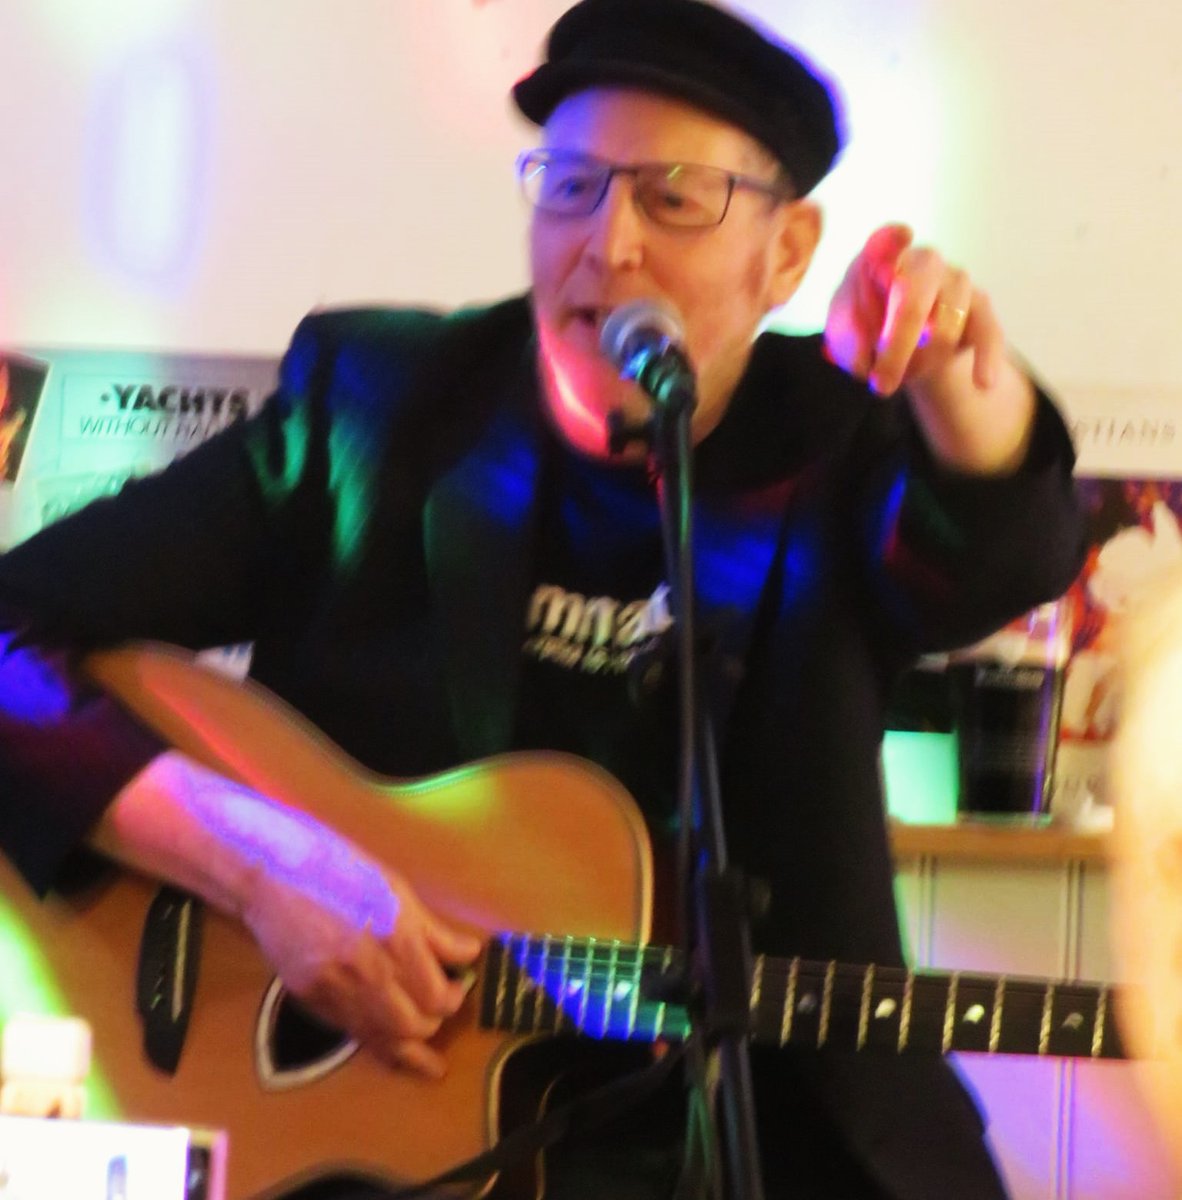 So enjoyed my 'Evening With' event last night in Llanfechell. Tall tales, ramshackle versions of songs old and new, and the odd bit of audience haranguing (here's a pic of me doing the latter). Thanks so much to all who came down.